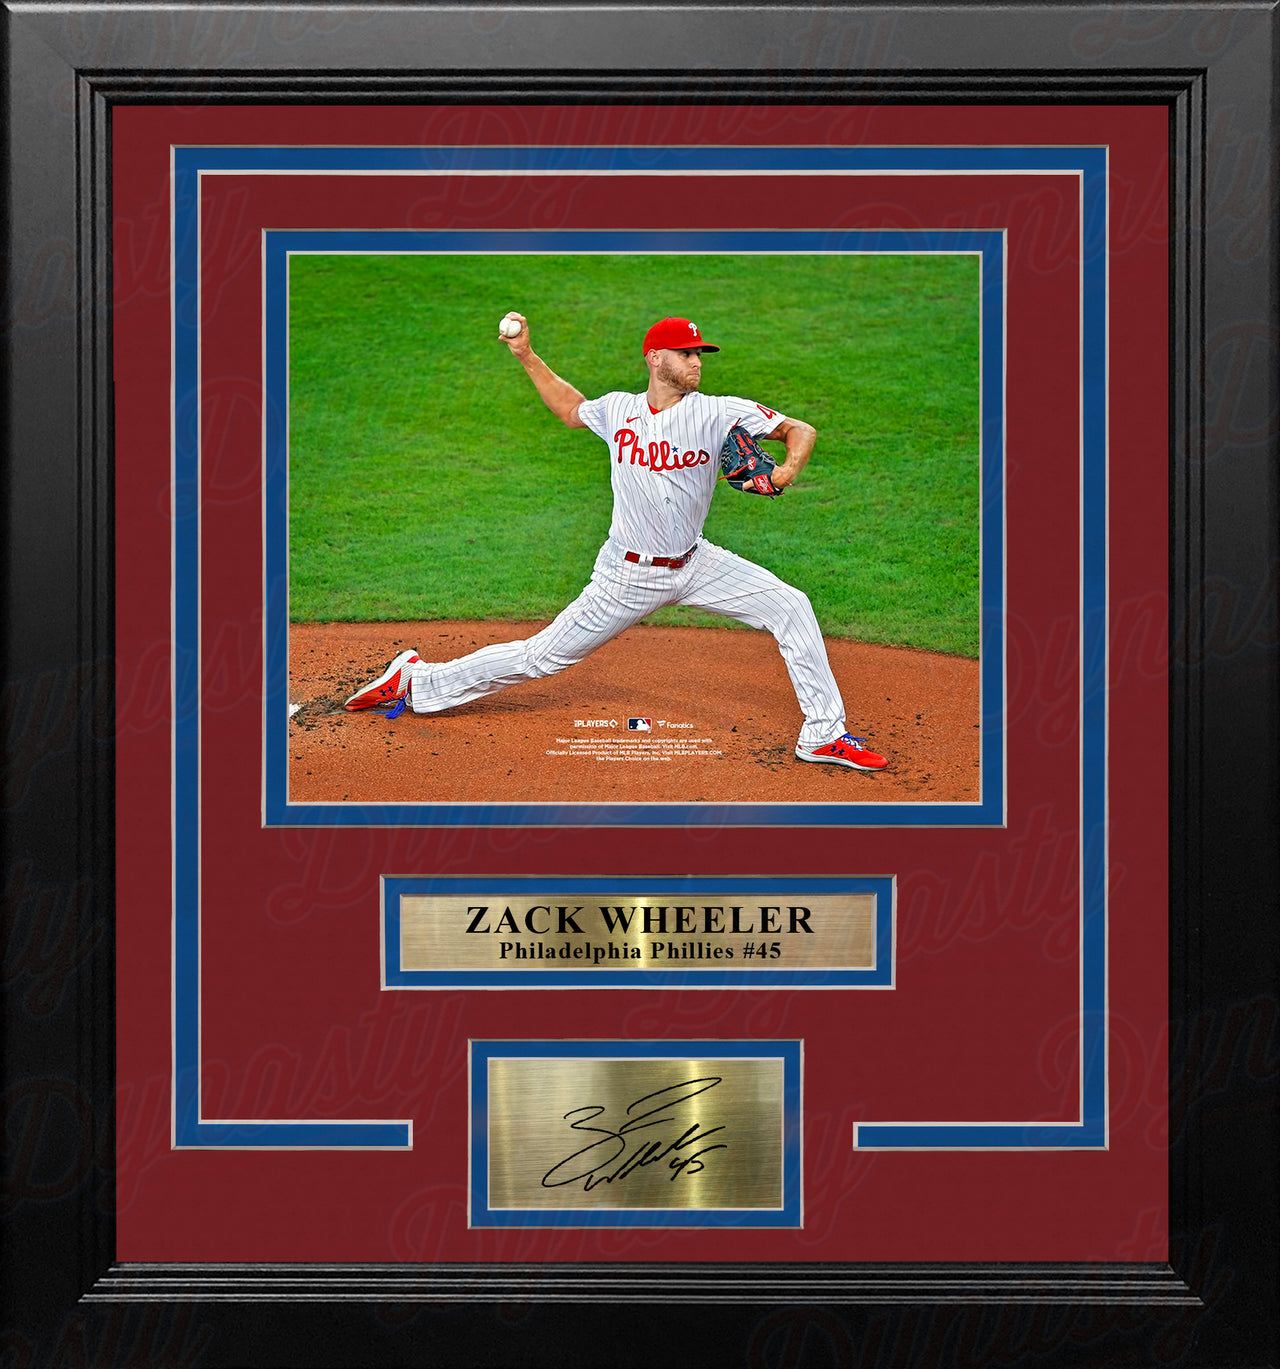 Zack Wheeler in Action Philadelphia Phillies 8" x 10" Framed Baseball Photo with Engraved Autograph